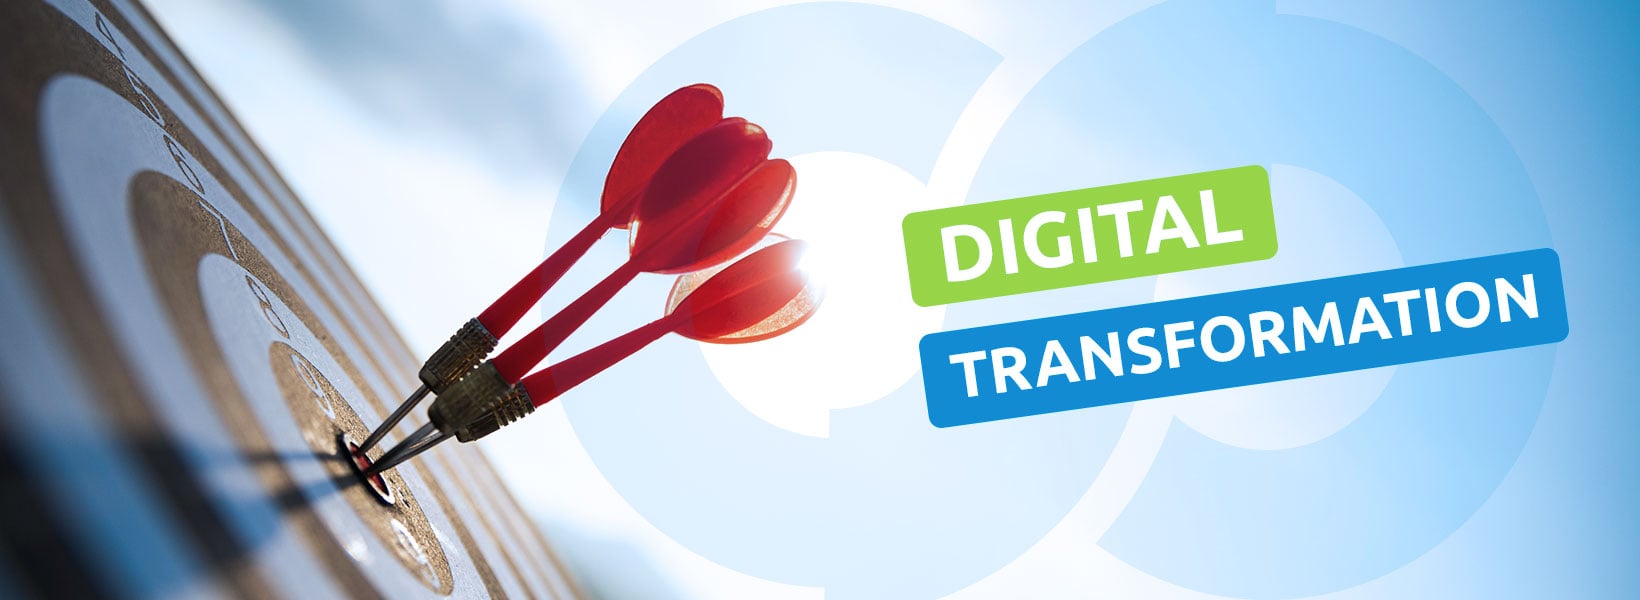 Digital Transformation in Customer Service – 5 Inspirational Success Stories (Part 3 of 4)